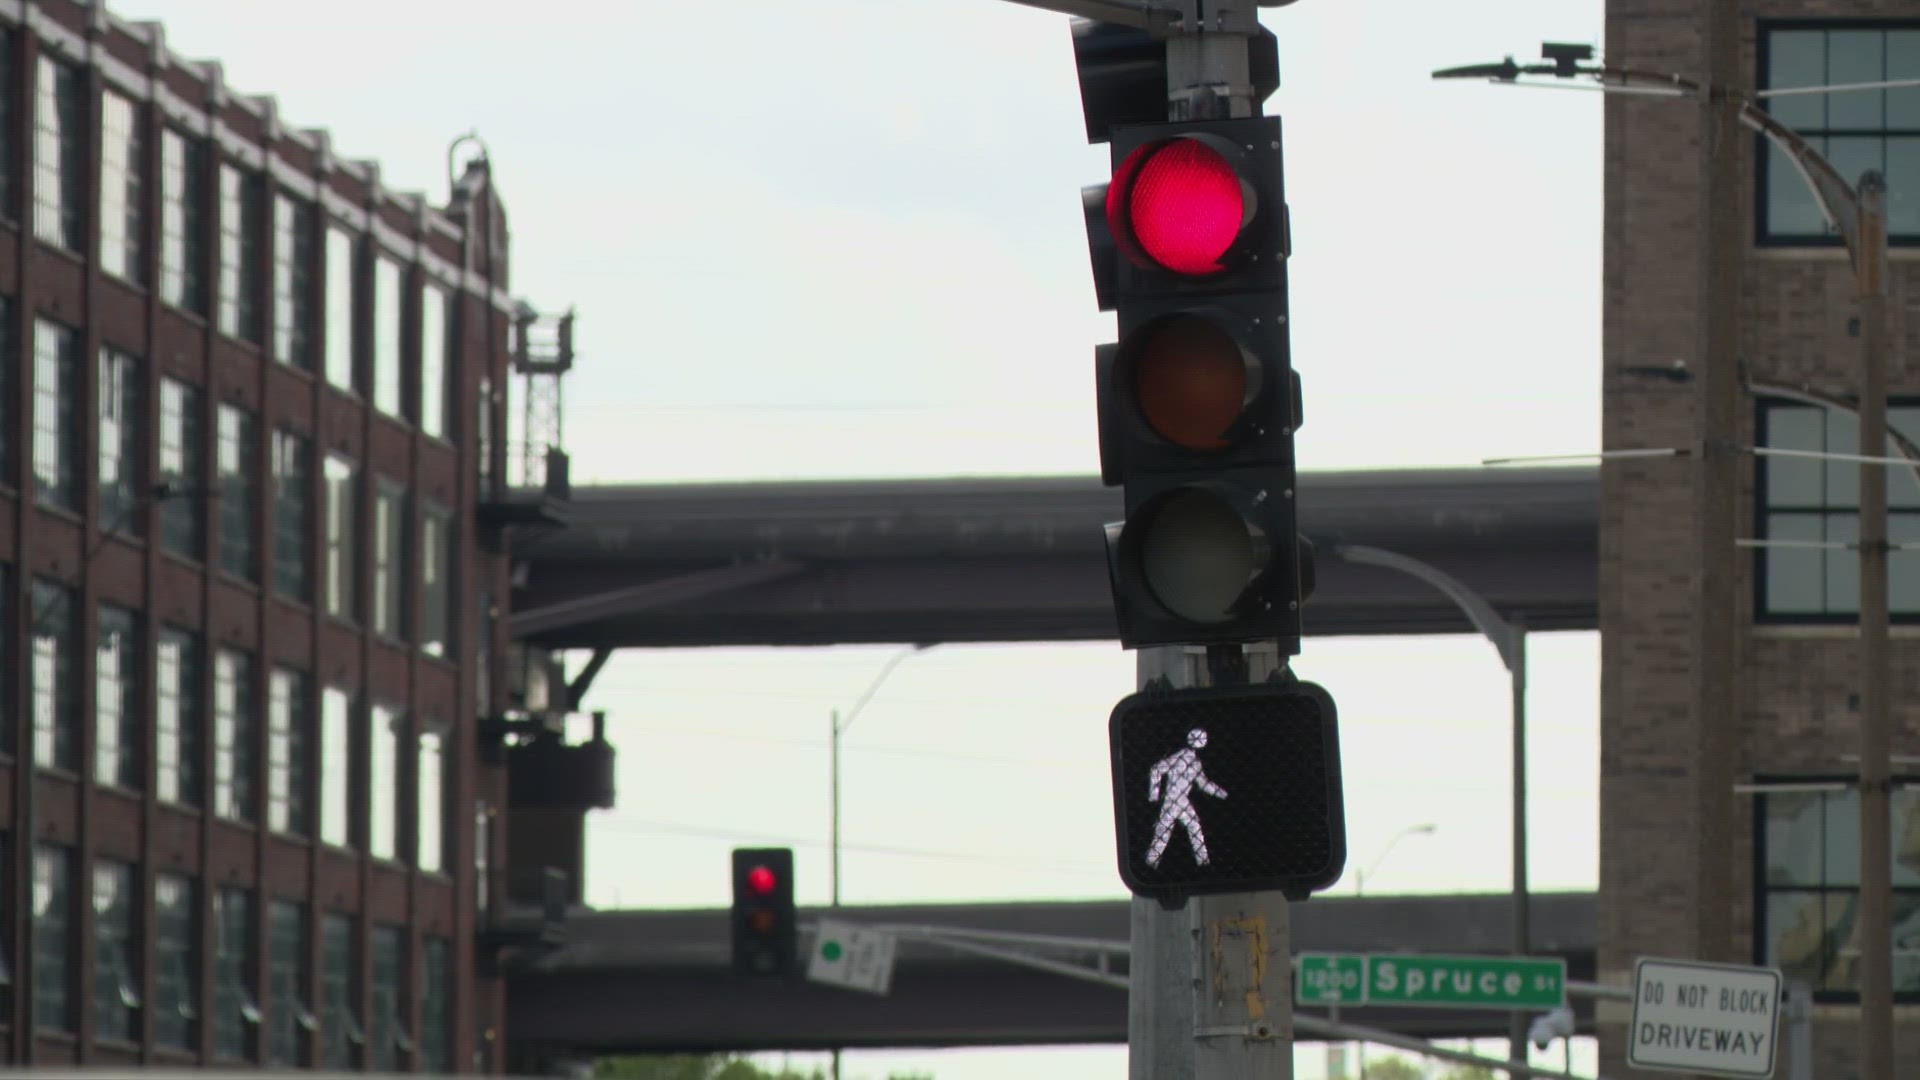 No timeline for implementation was mentioned in Monday's announcement, but experts say cameras usually hit streets 10 months after legislation is passed.